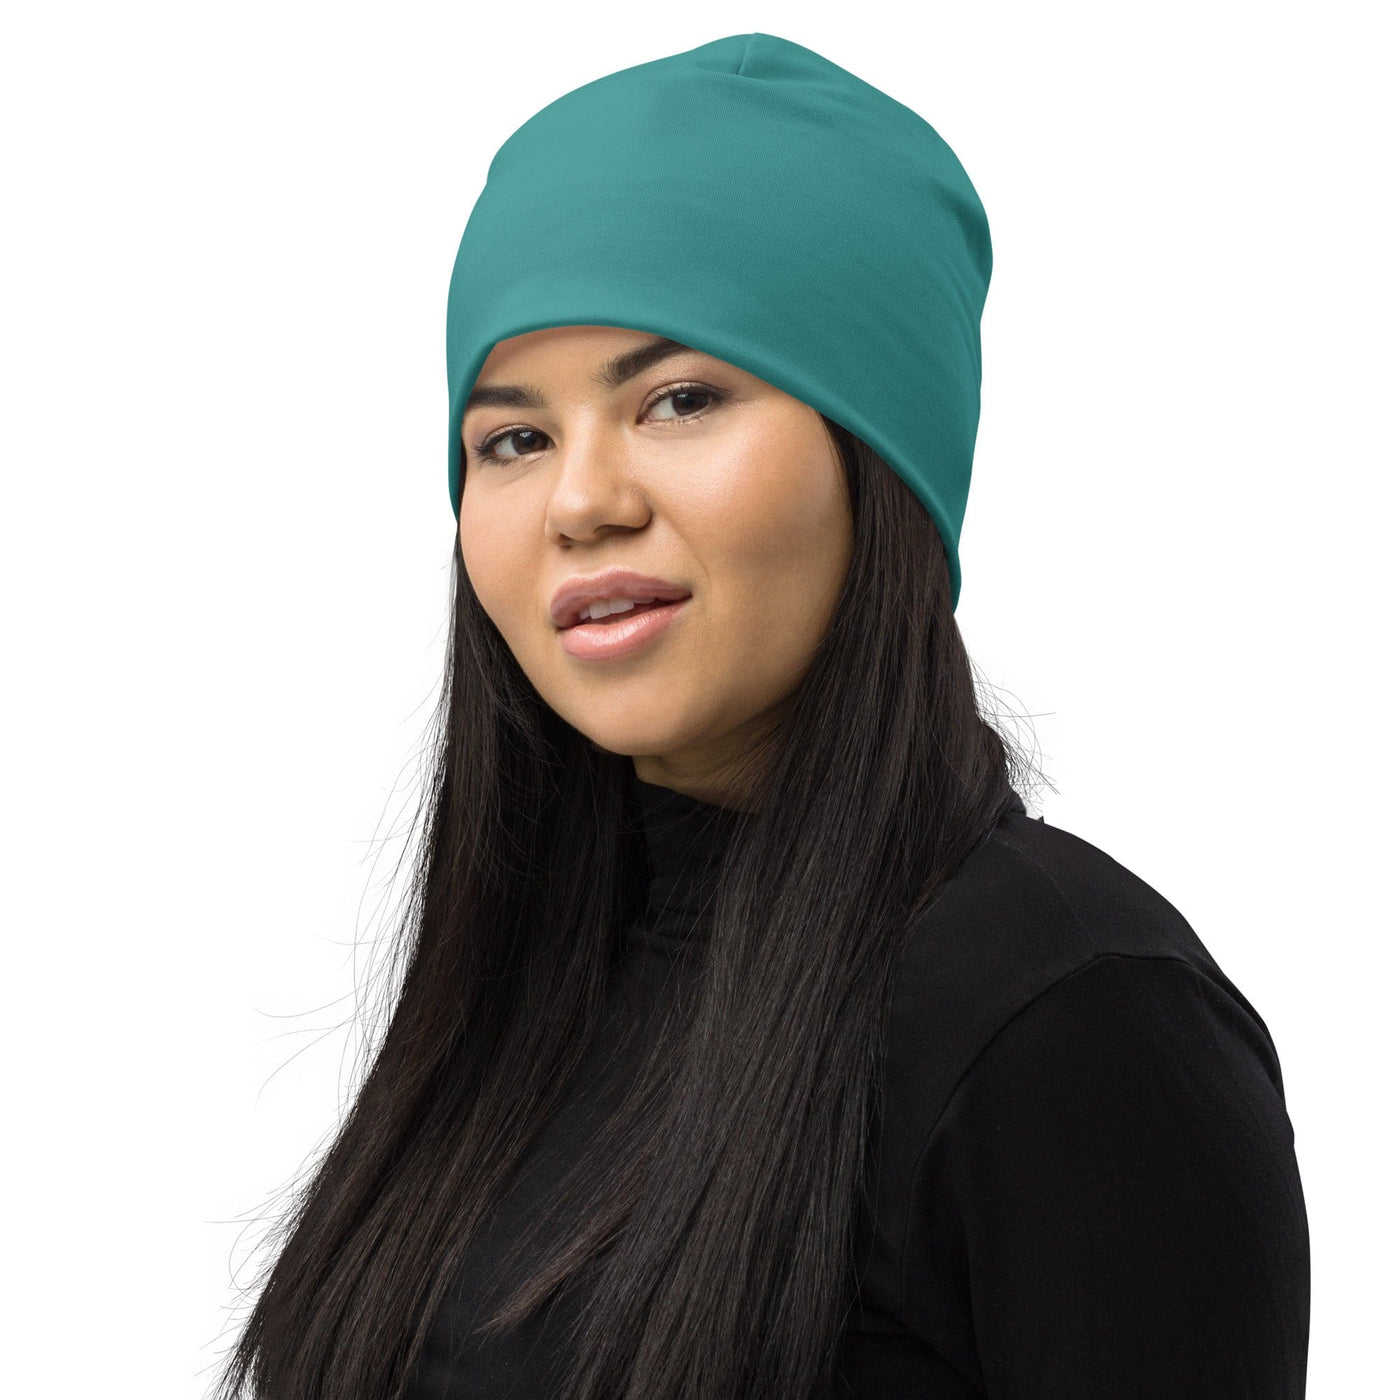 Double-layered Beanie Hat Teal Green